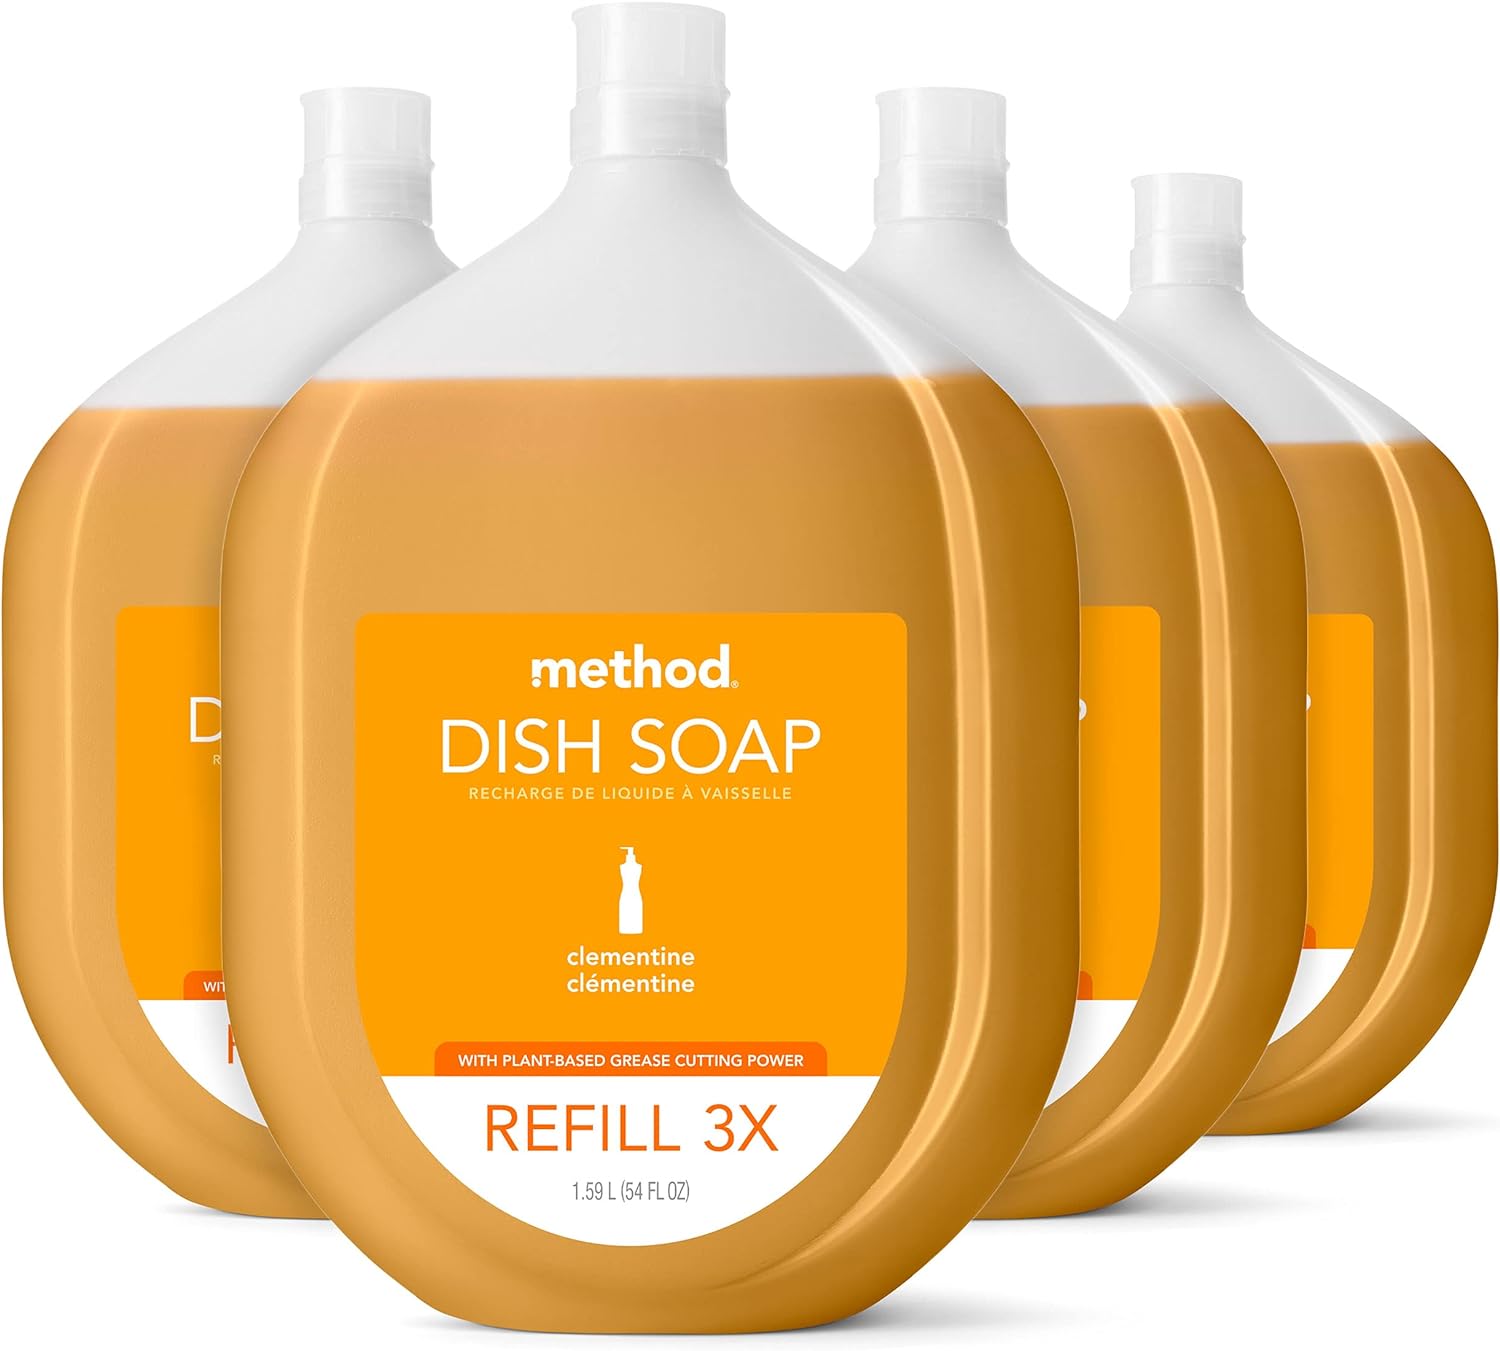 Method Dish Soap, Refill, Clementine, Biodegradable Formula, Tough on Grease, 54 oz (Pack of 4)